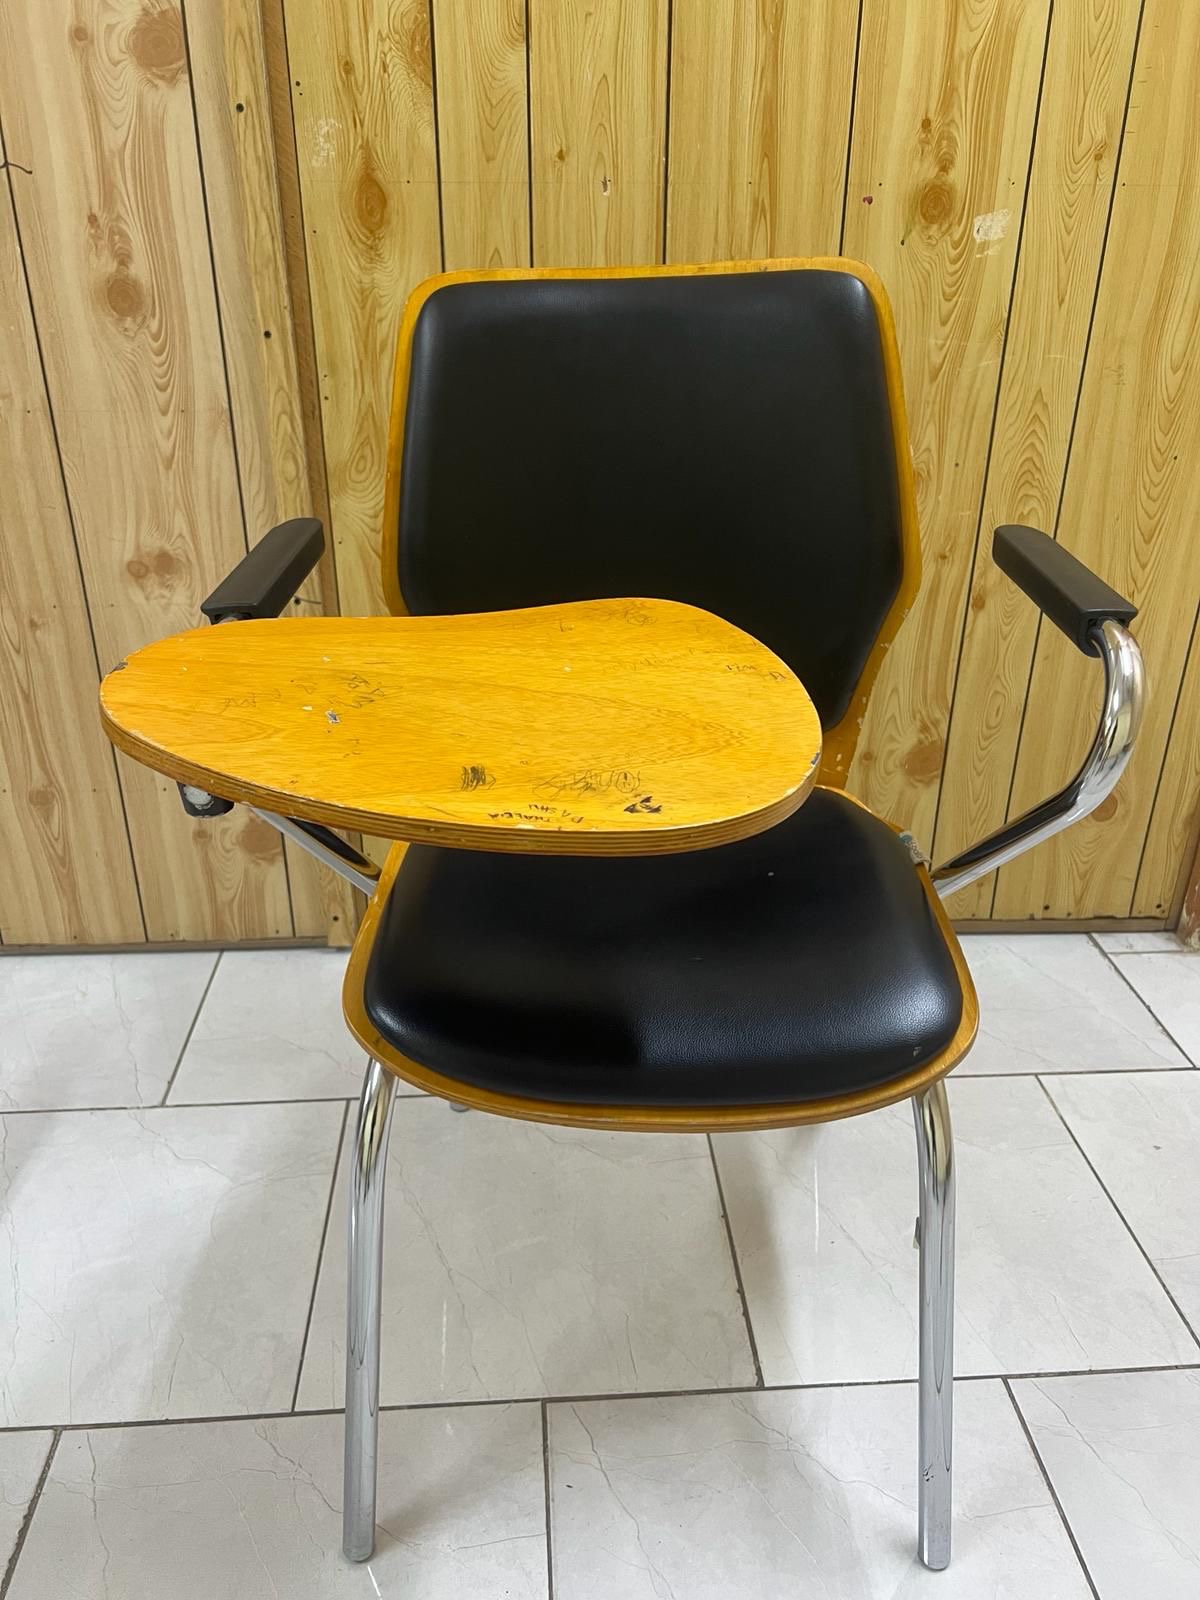 🔥 Urgent Sale for Used Chairs with writing pads